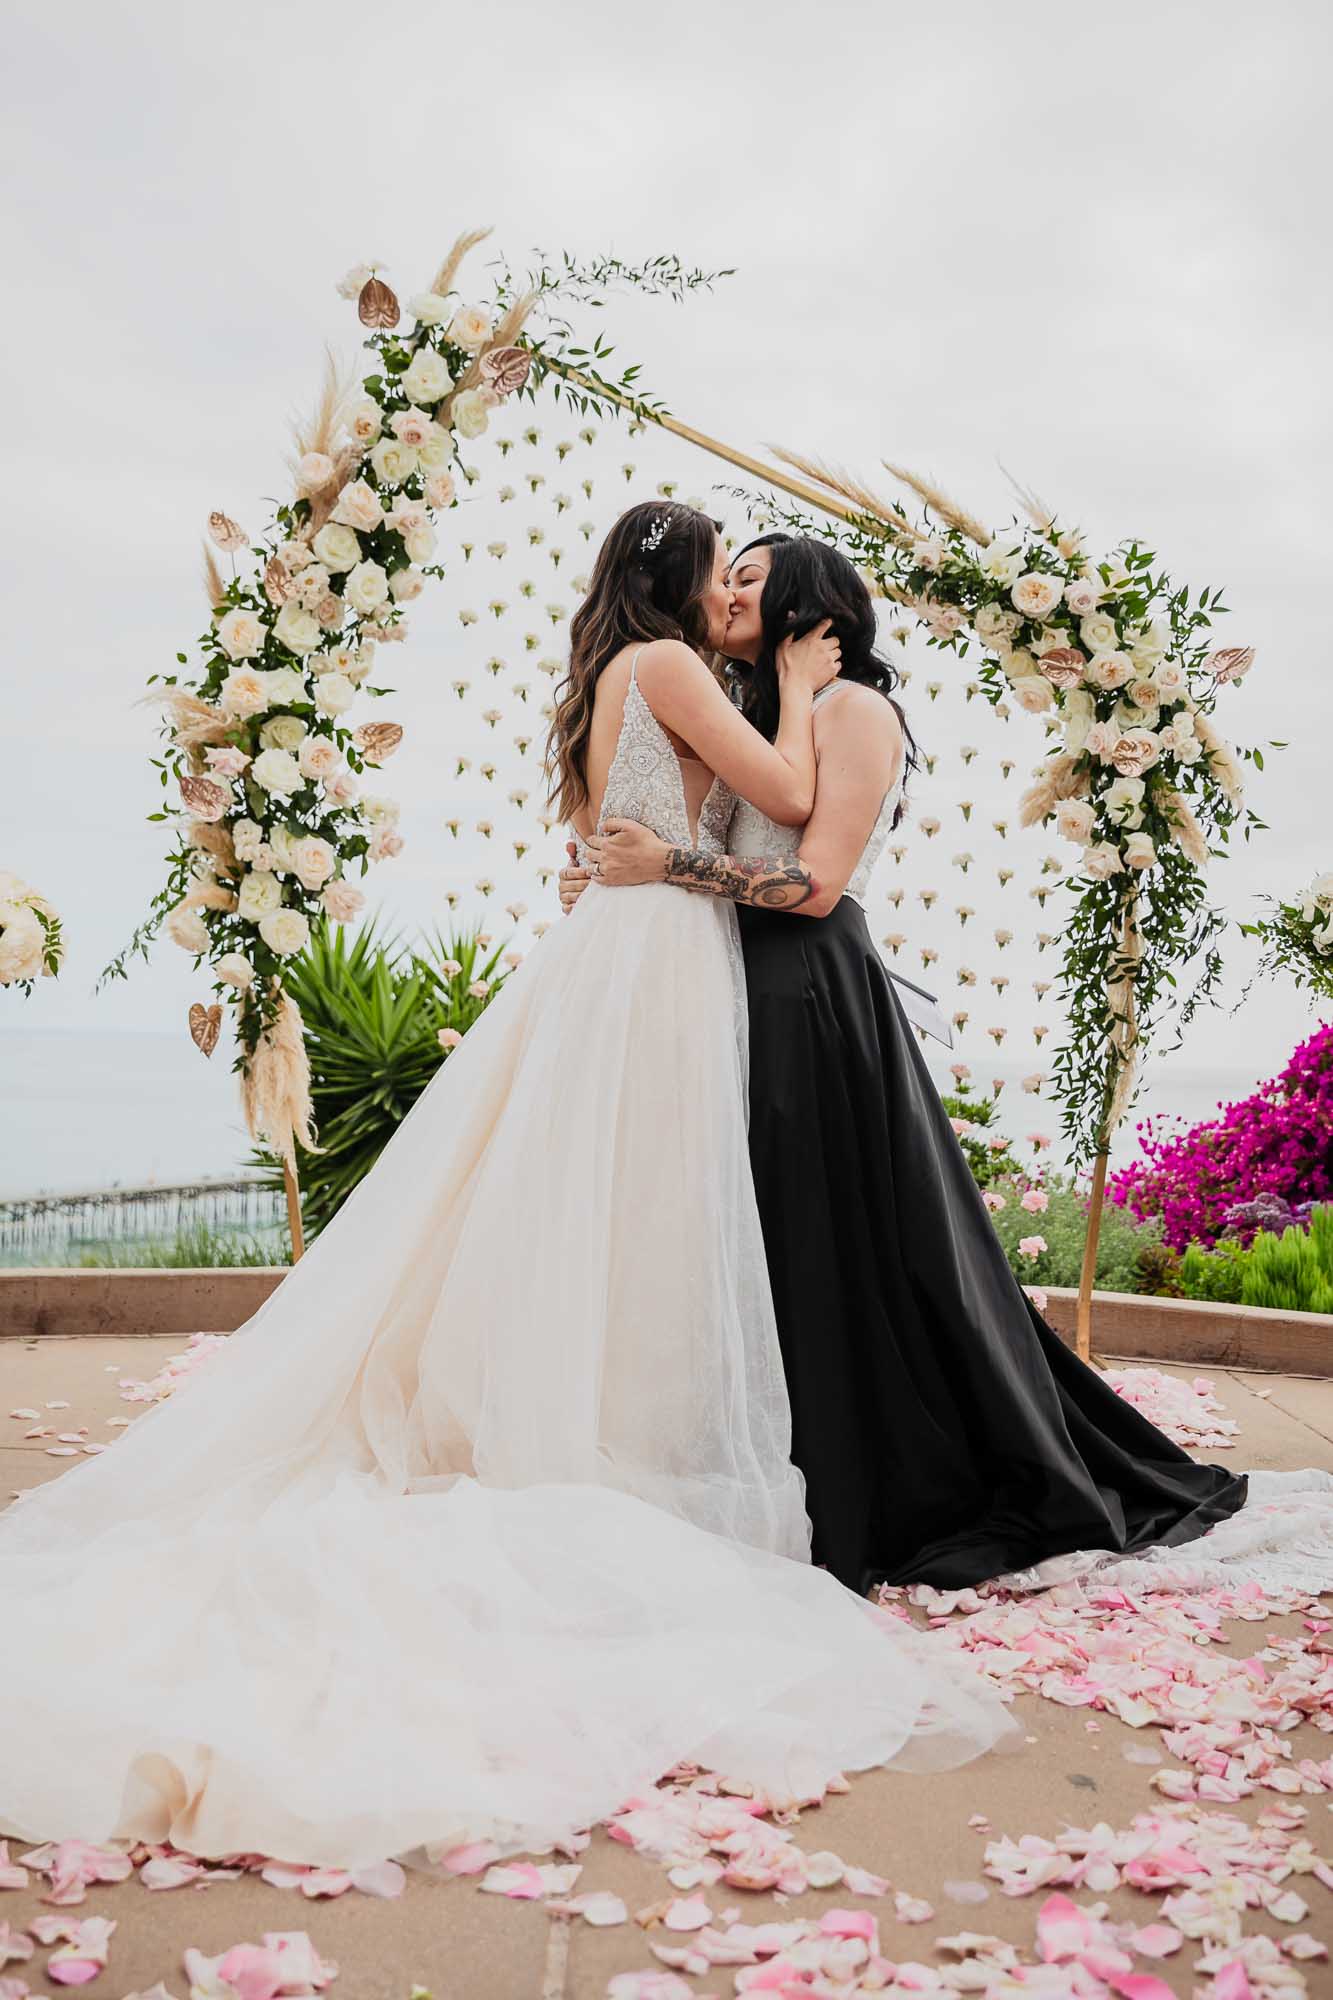 Romantic California wedding with an ocean view | Sarah Mack Photo | Featured on Equally Wed, the leading LGBTQ+ wedding magazine